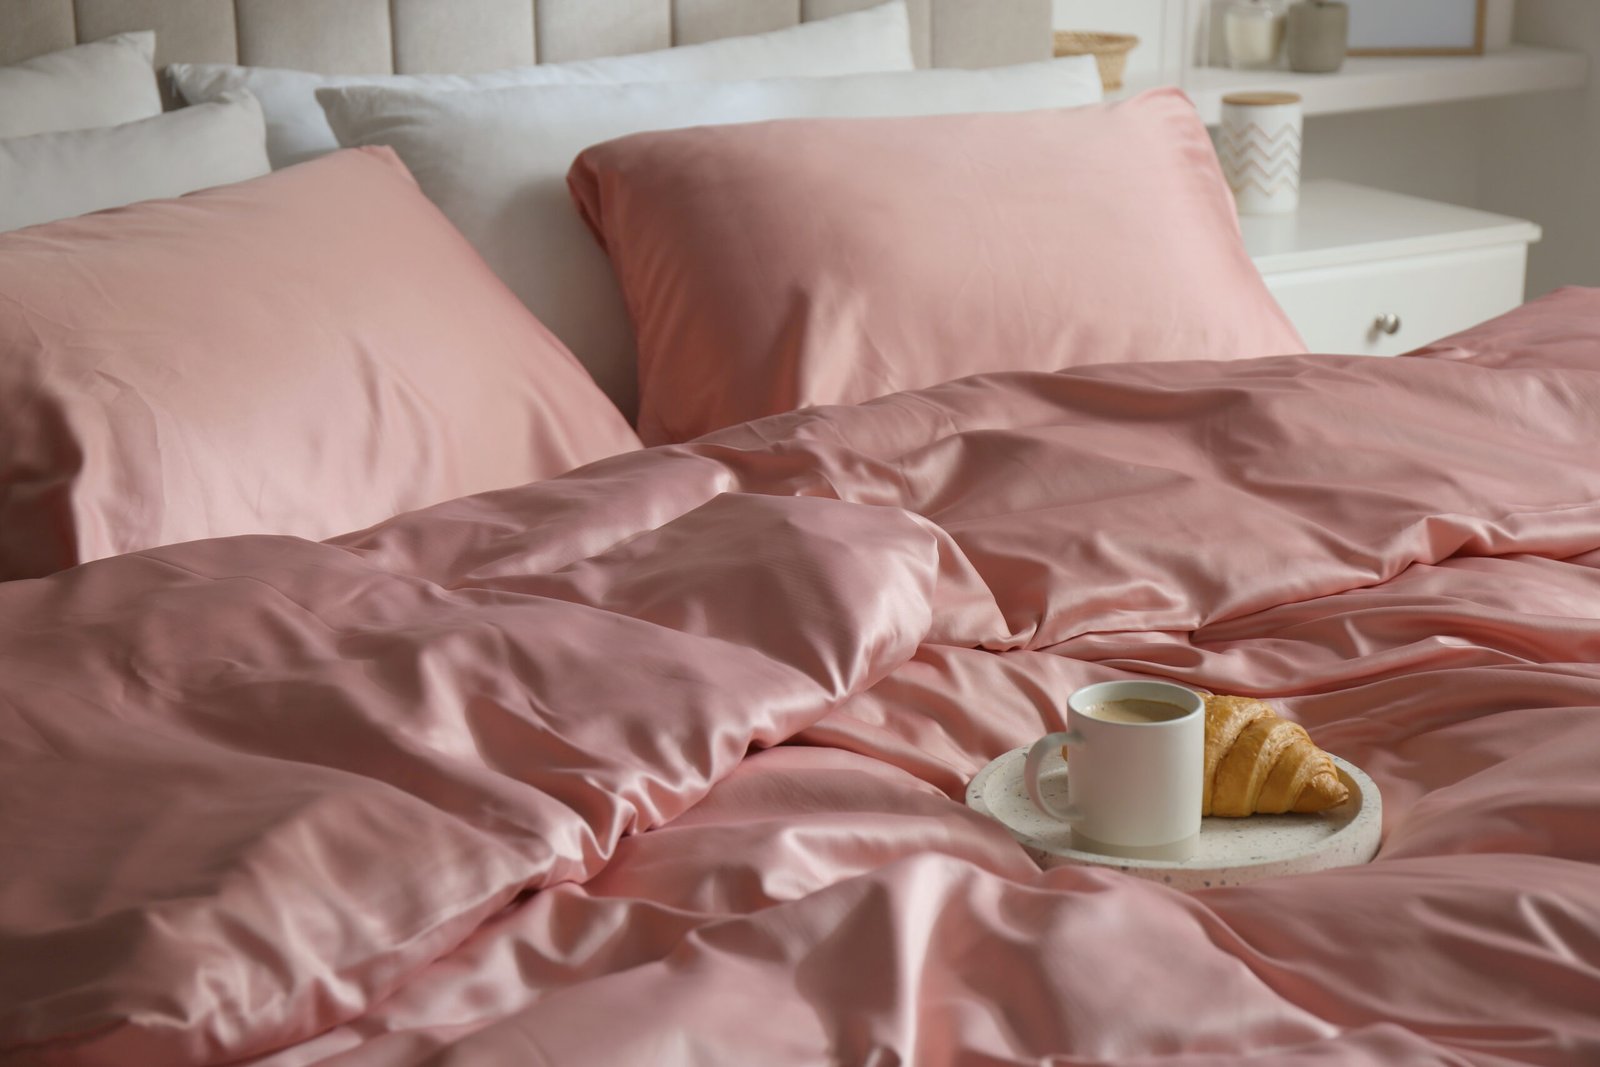 Croissant and coffee in breakfast tray on bed with beautiful pink silk linens bed sheet.